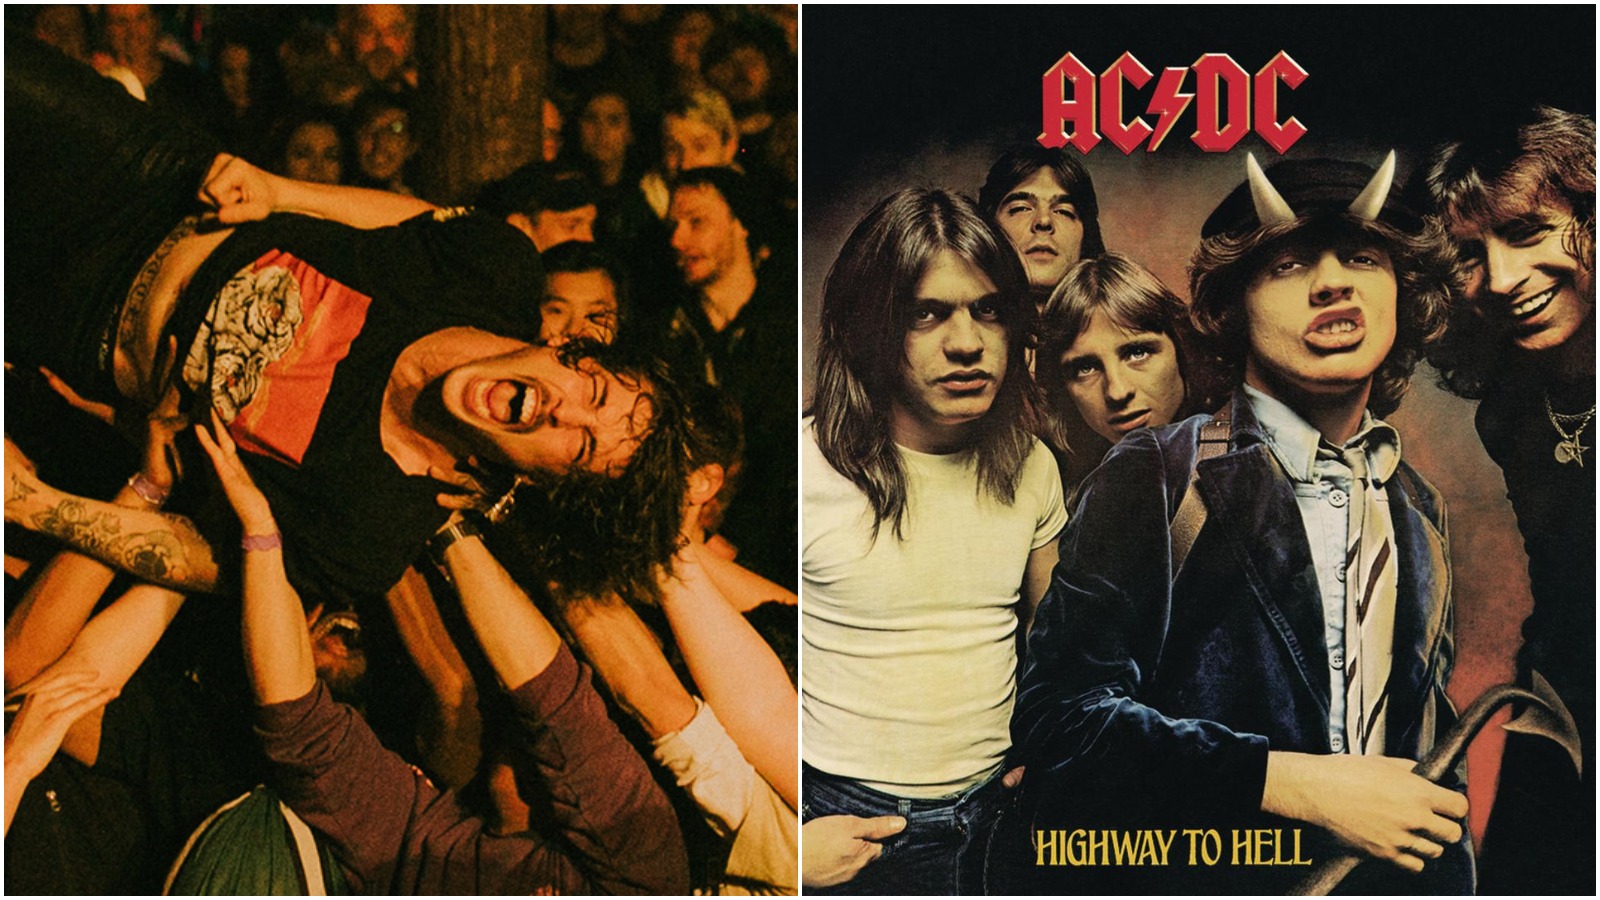 Acdc highway to hell. АС ДС Highway to Hell. Группа AC/DC 1979. AC DC Highway to Hell обложка. AC DC Highway to Hell 1979 обложка.